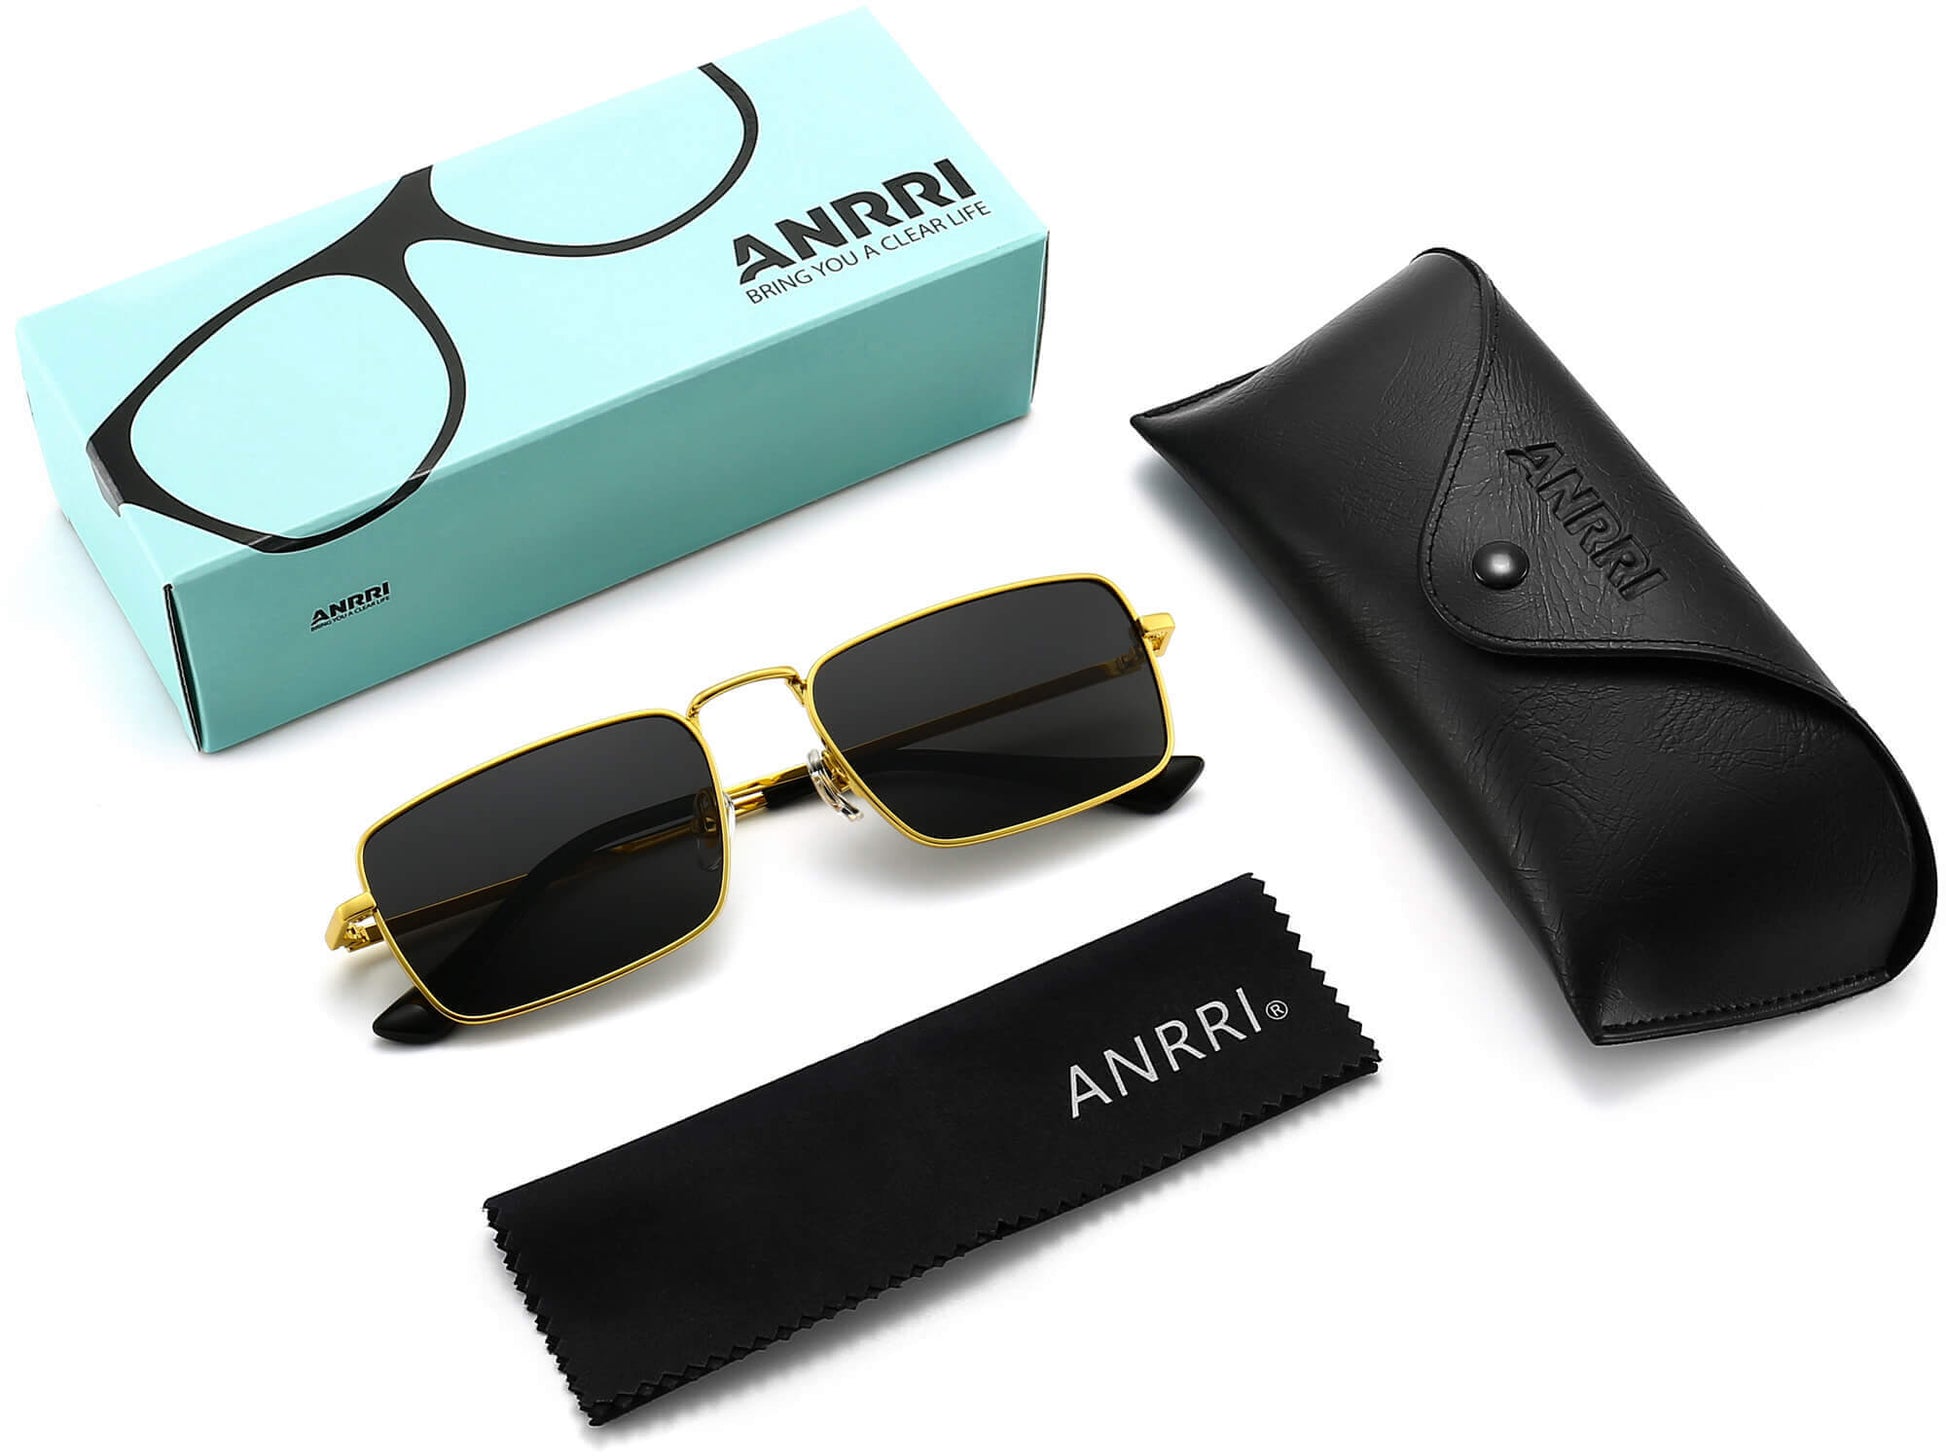 Patrick Gold Stainless steel Sunglasses with Accessories from ANRRI